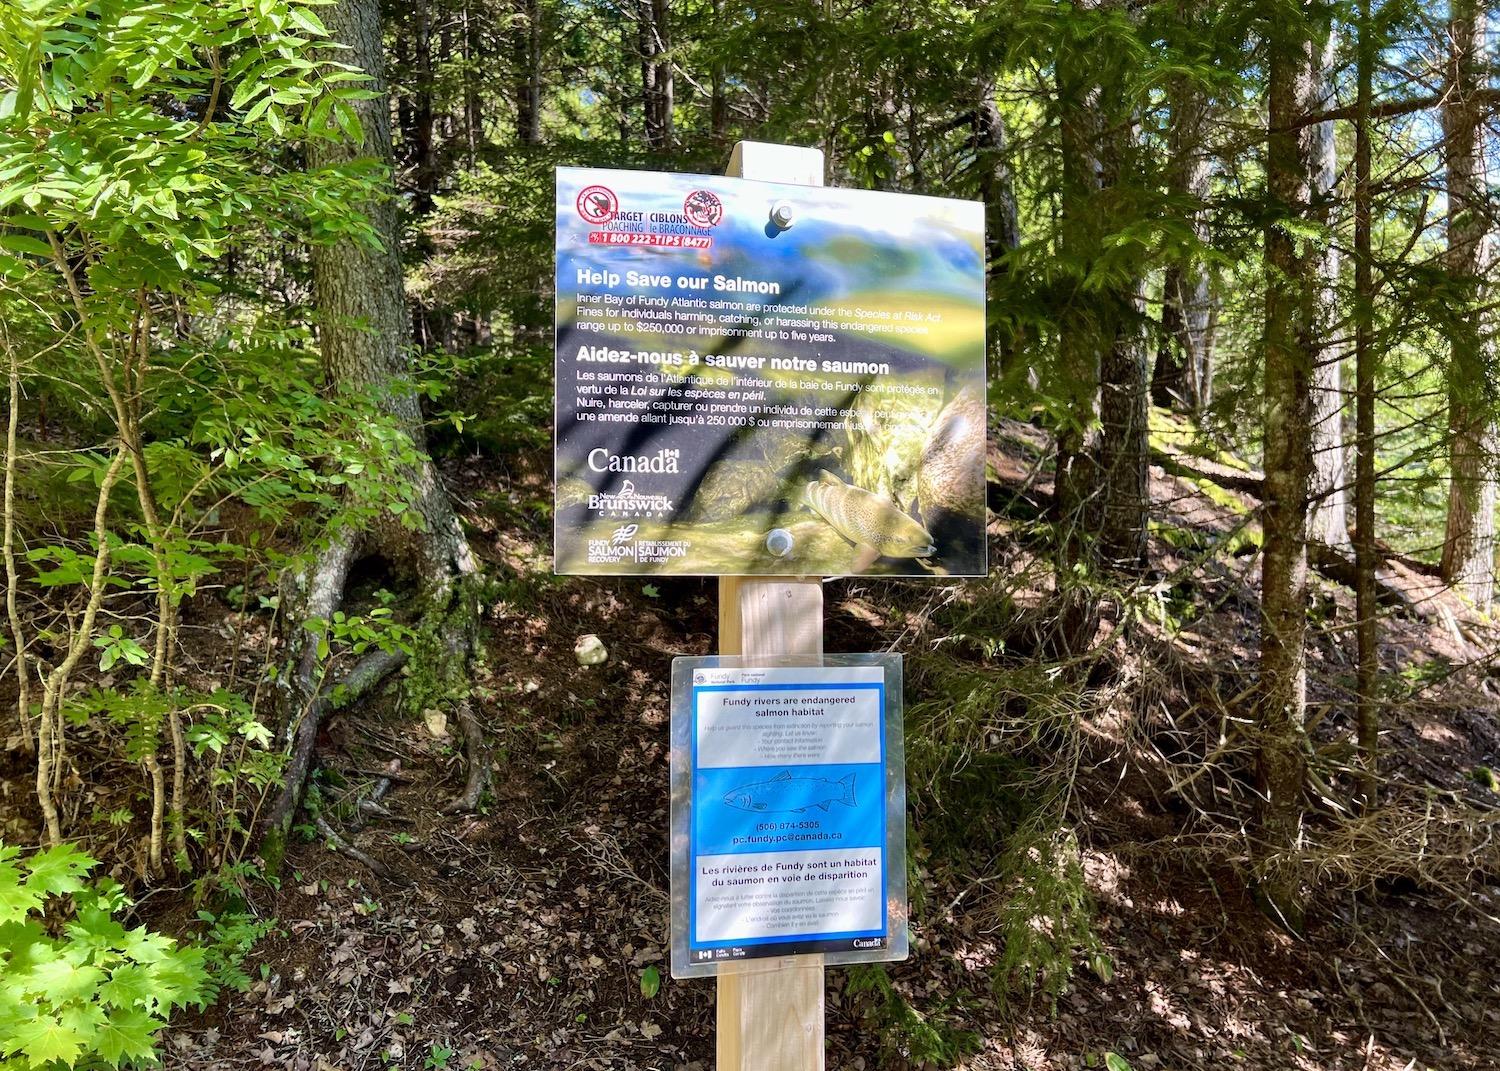 Fundy National Park's hikers are told to report salmon sightings and poachers.